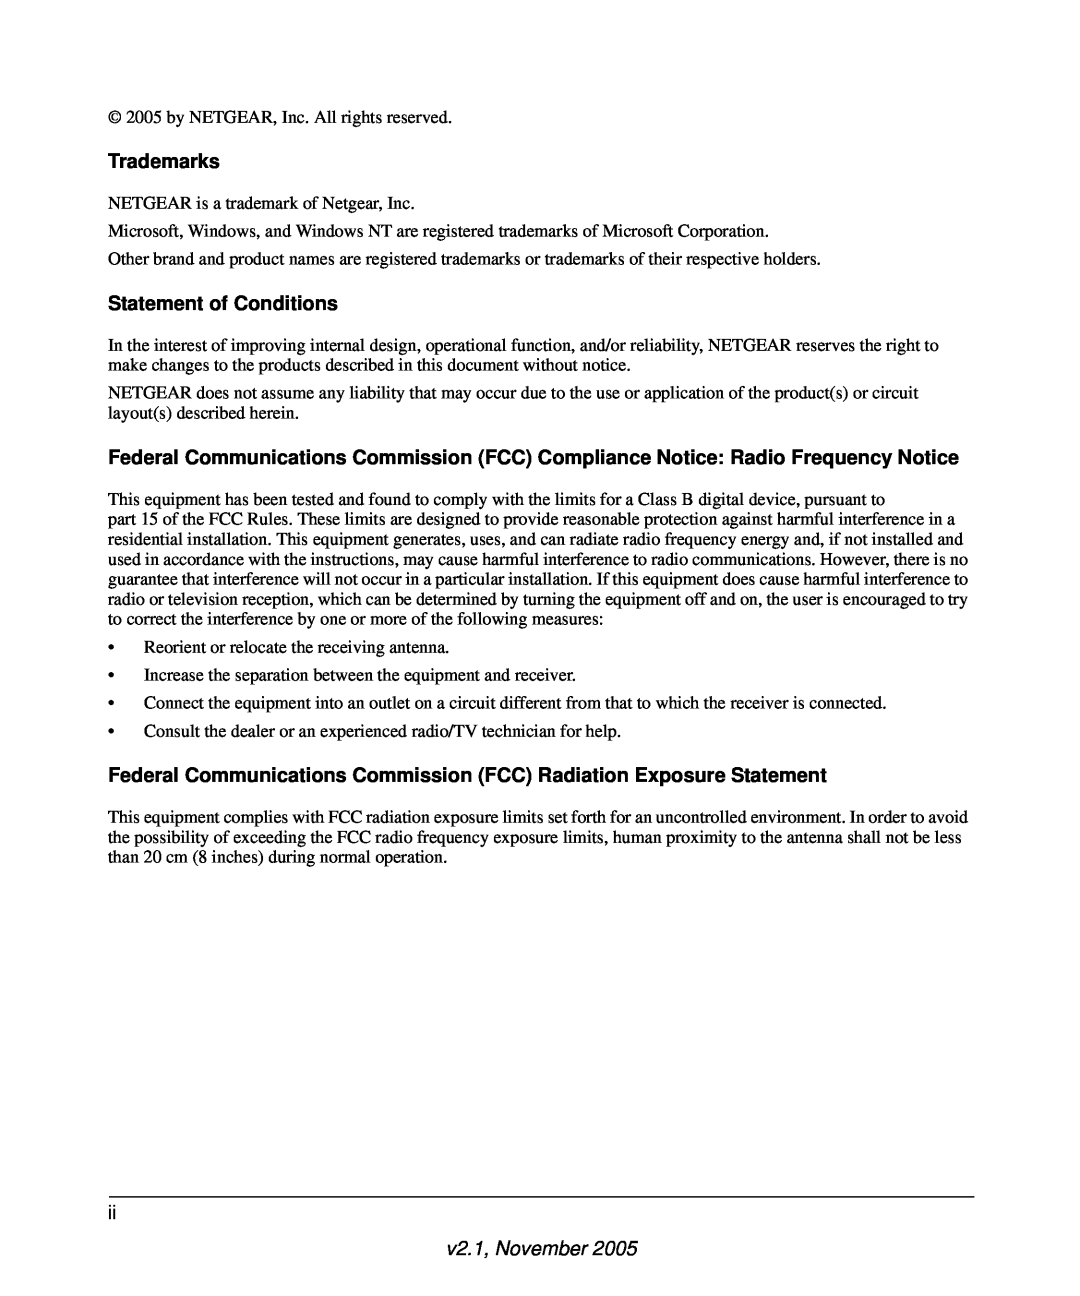 NETGEAR DG834 Trademarks, Statement of Conditions, Federal Communications Commission FCC Radiation Exposure Statement 